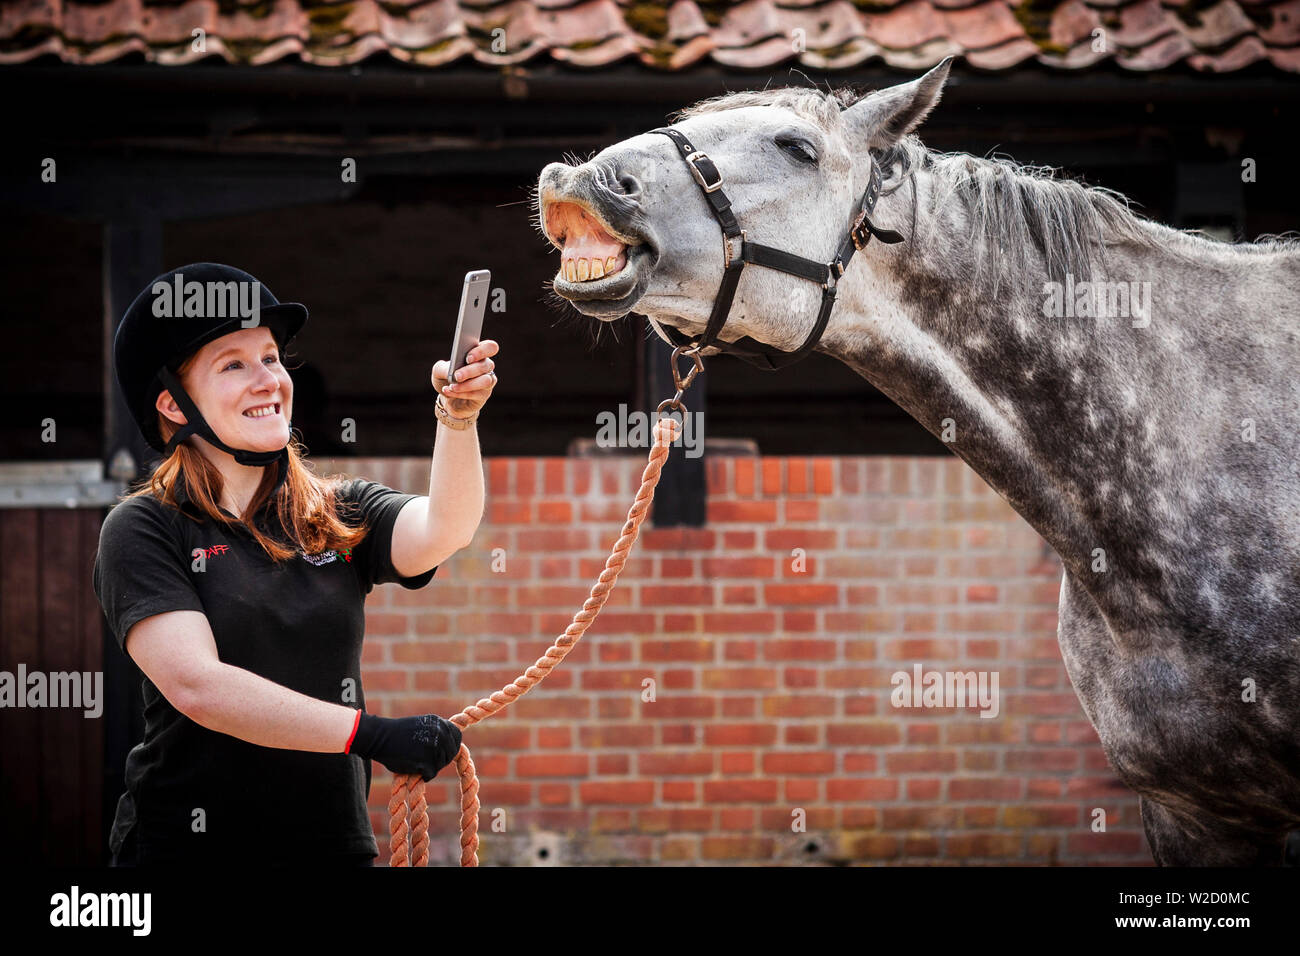 Stephanie Callen of the Redwings Horse Sanctuary in Hapton, Norfolk with retired racehorse, 'Nobby' using her Apple iPhone to record the sounds of horses for a project to create an archive for use in films, radio and TV.  Inspired by the ÒWilhelm ScreamÓ C the sound effect of a horseÕs neigh that has become a joke in Hollywood, having been used in films from Star Wars to Indiana Jones to Disney films and more C two companies have joined forces to replace it.  Social network and app Equilab and sound library De Wolfe Music, which has supplied sound for films including Brokeback Mountain and Ame Stock Photo